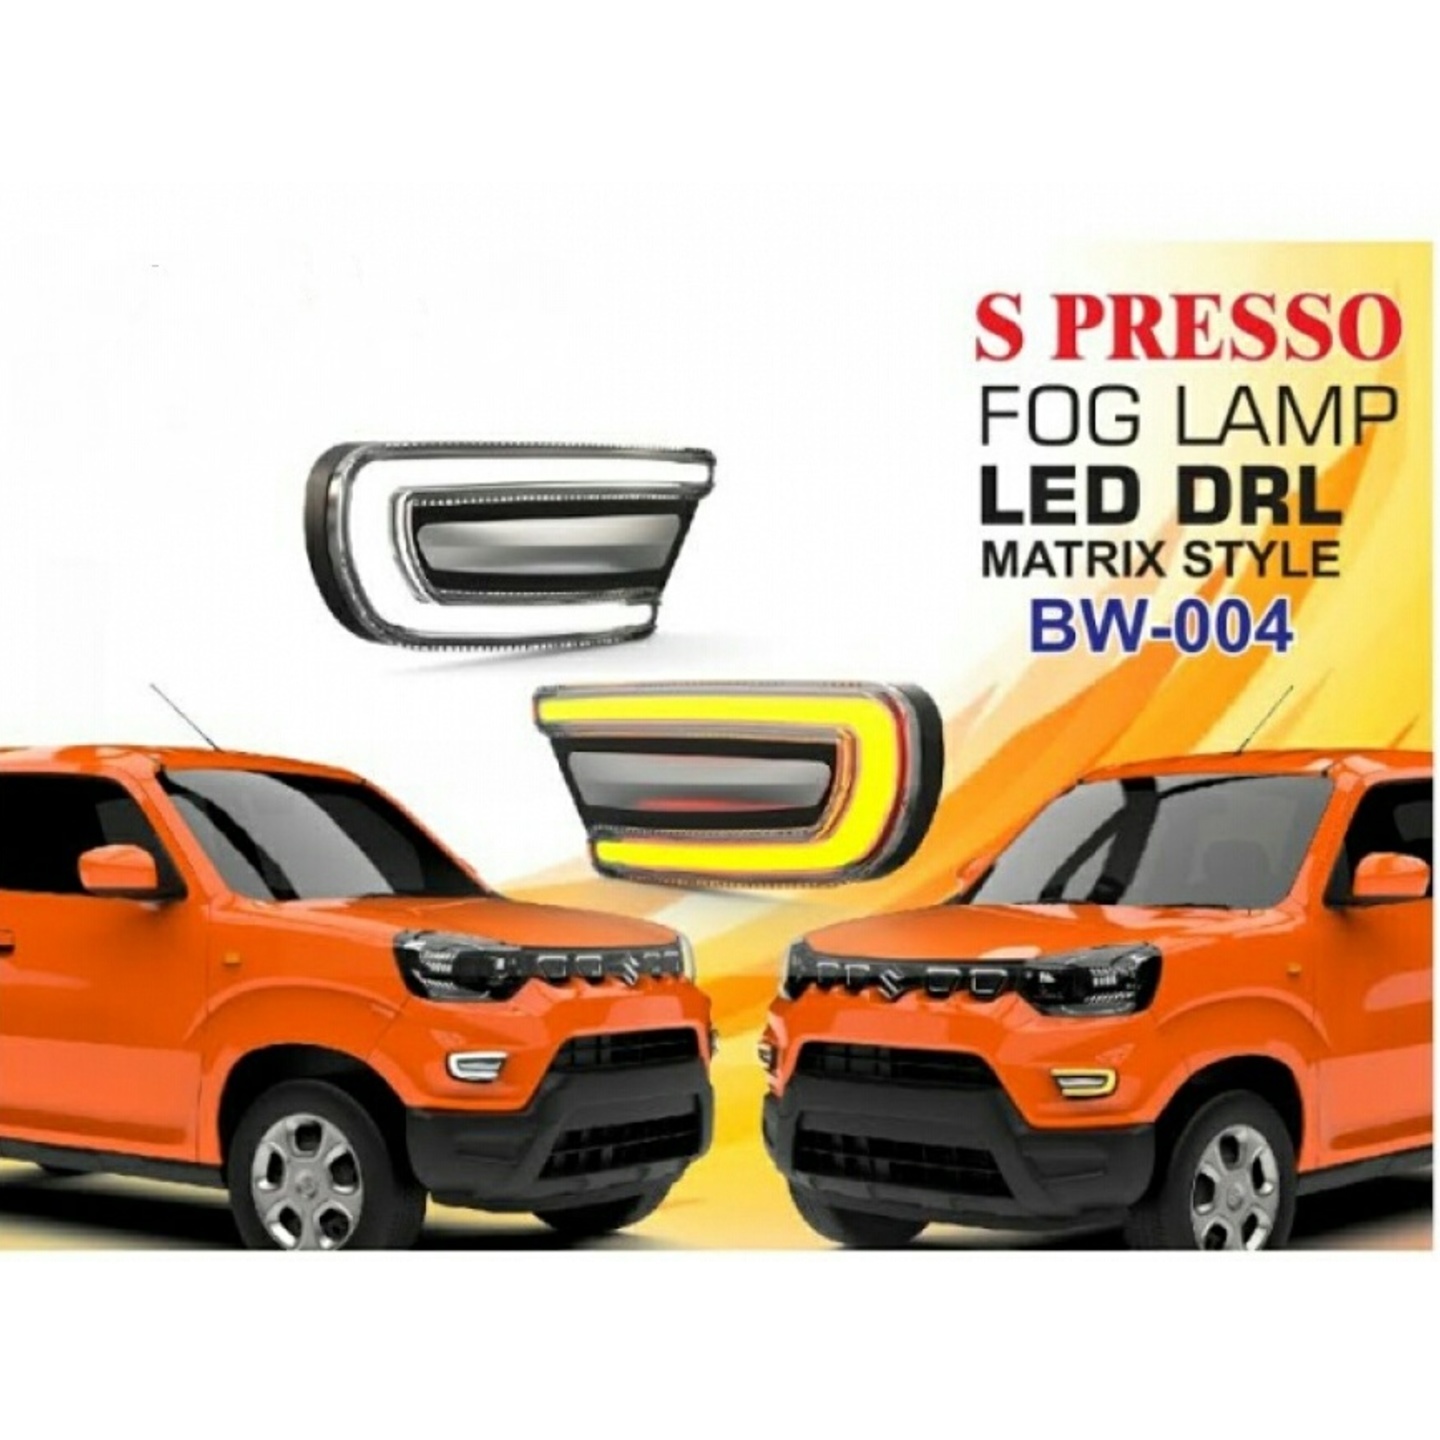 S presso fog lamp with DRL. Indicator